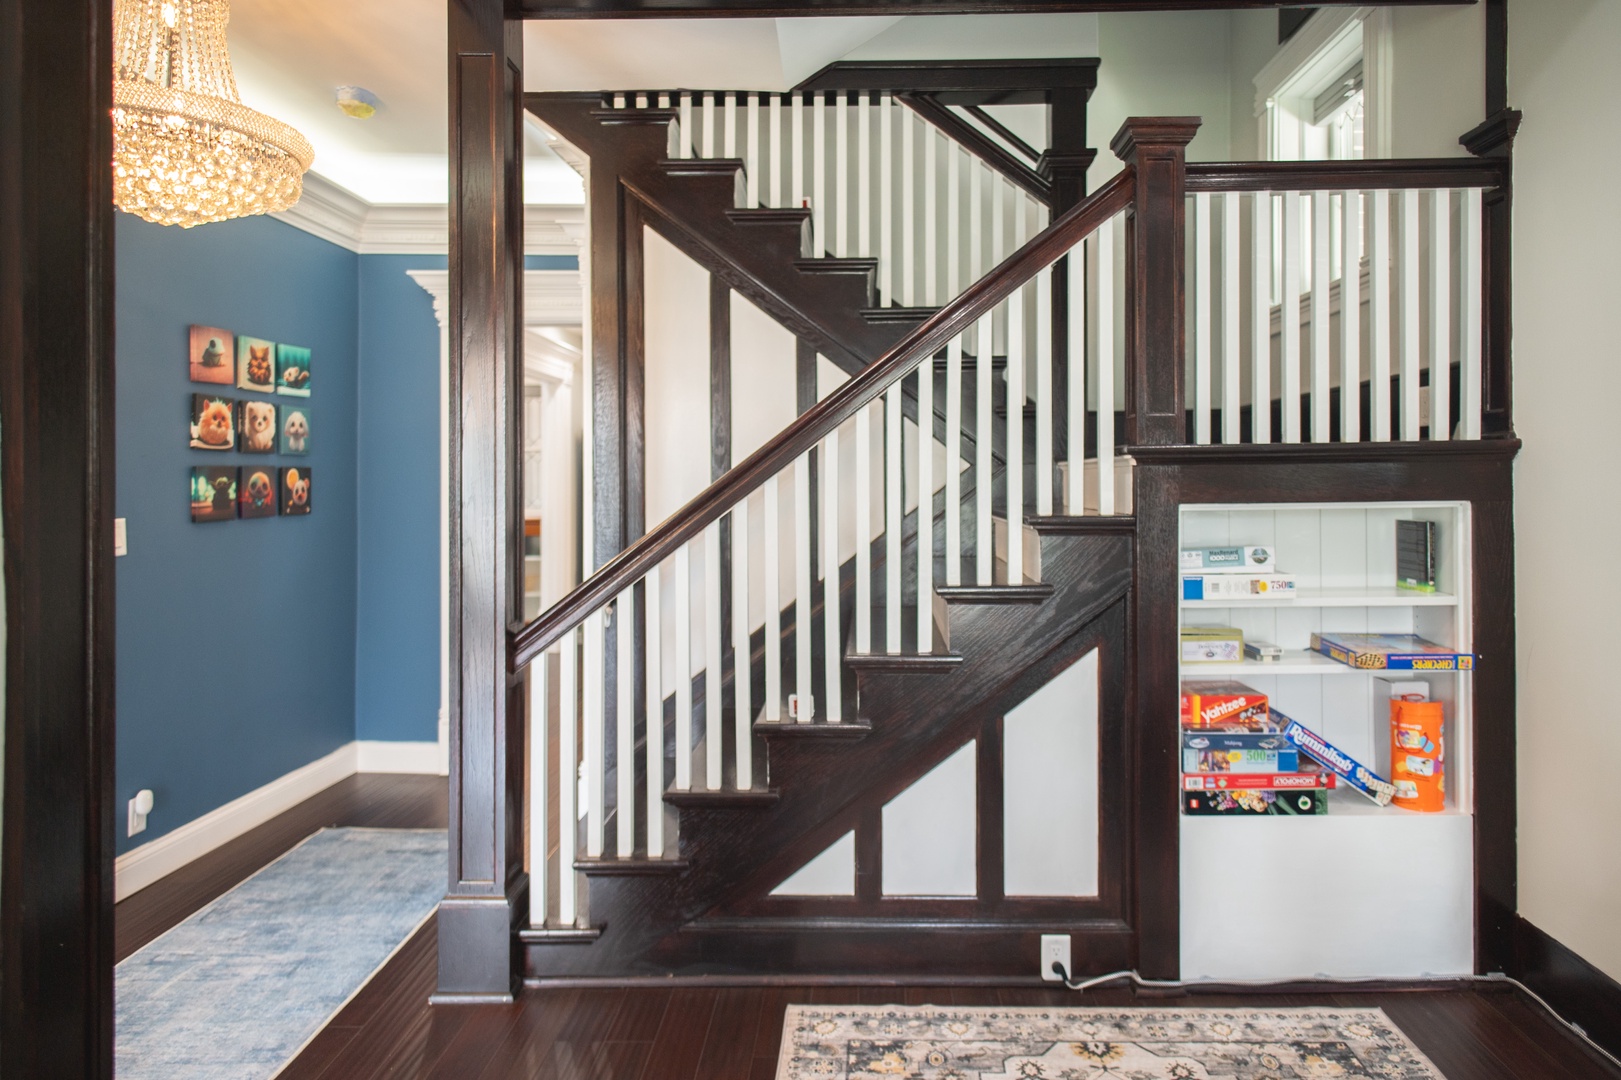 Gorgeous woodwork & historic details abound throughout this exceptional home